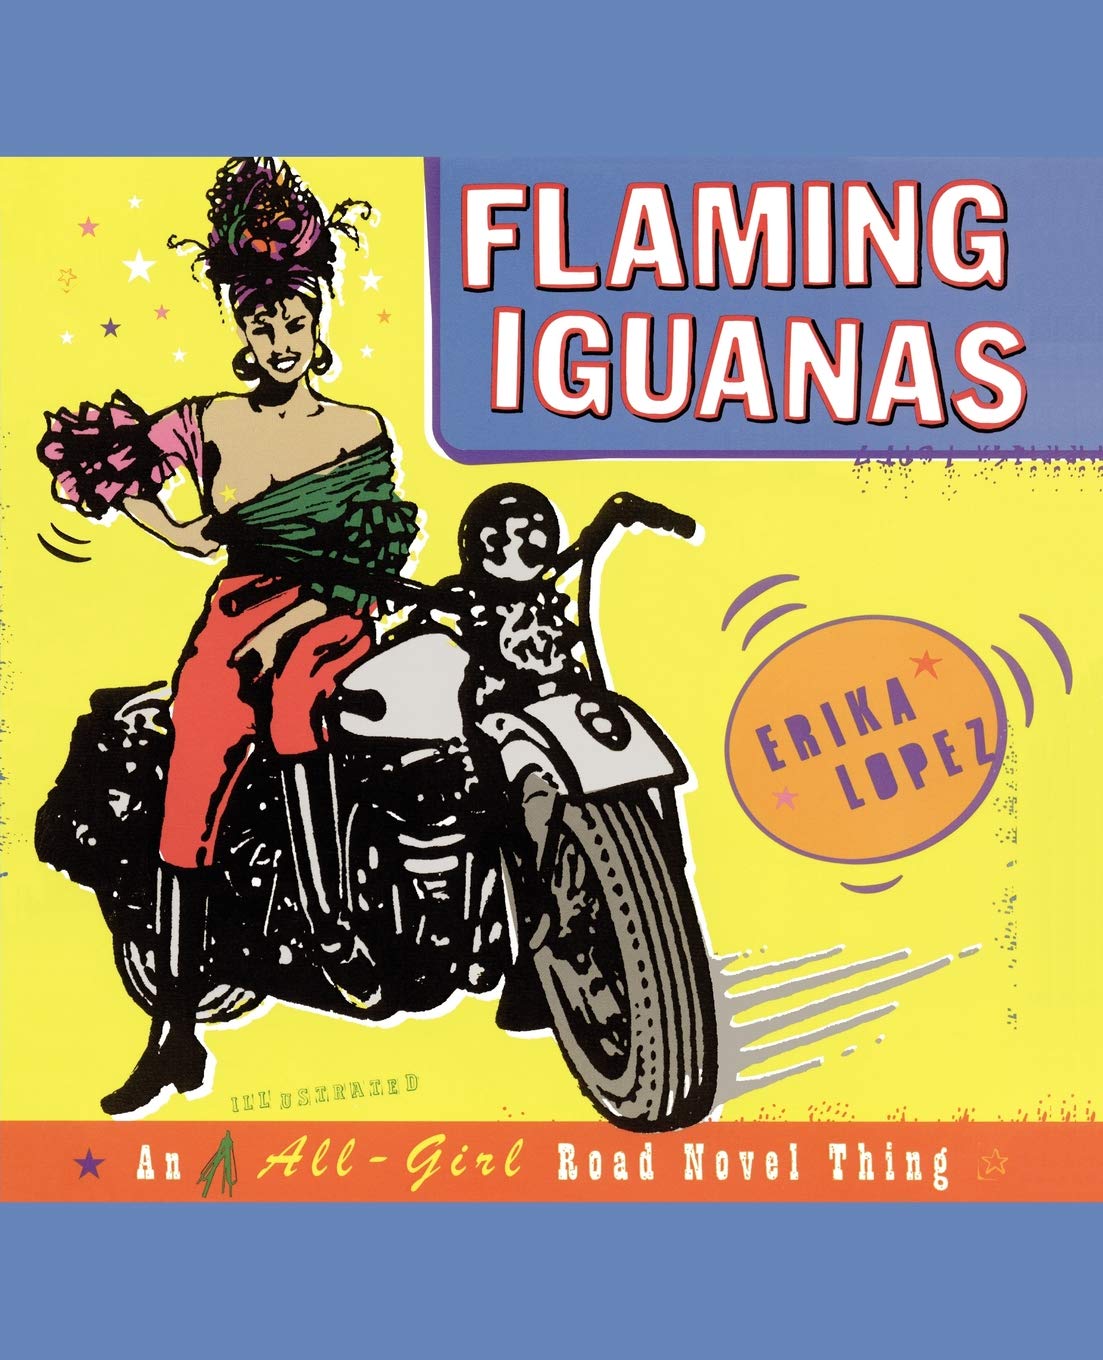 Vibrant retro-style book cover featuring a woman in a headscarf and sunglasses sitting on a motorcycle, with the title 'flaming iguanas' by erika lopez set against a bold yellow background, promoting an all-girl road novel theme.